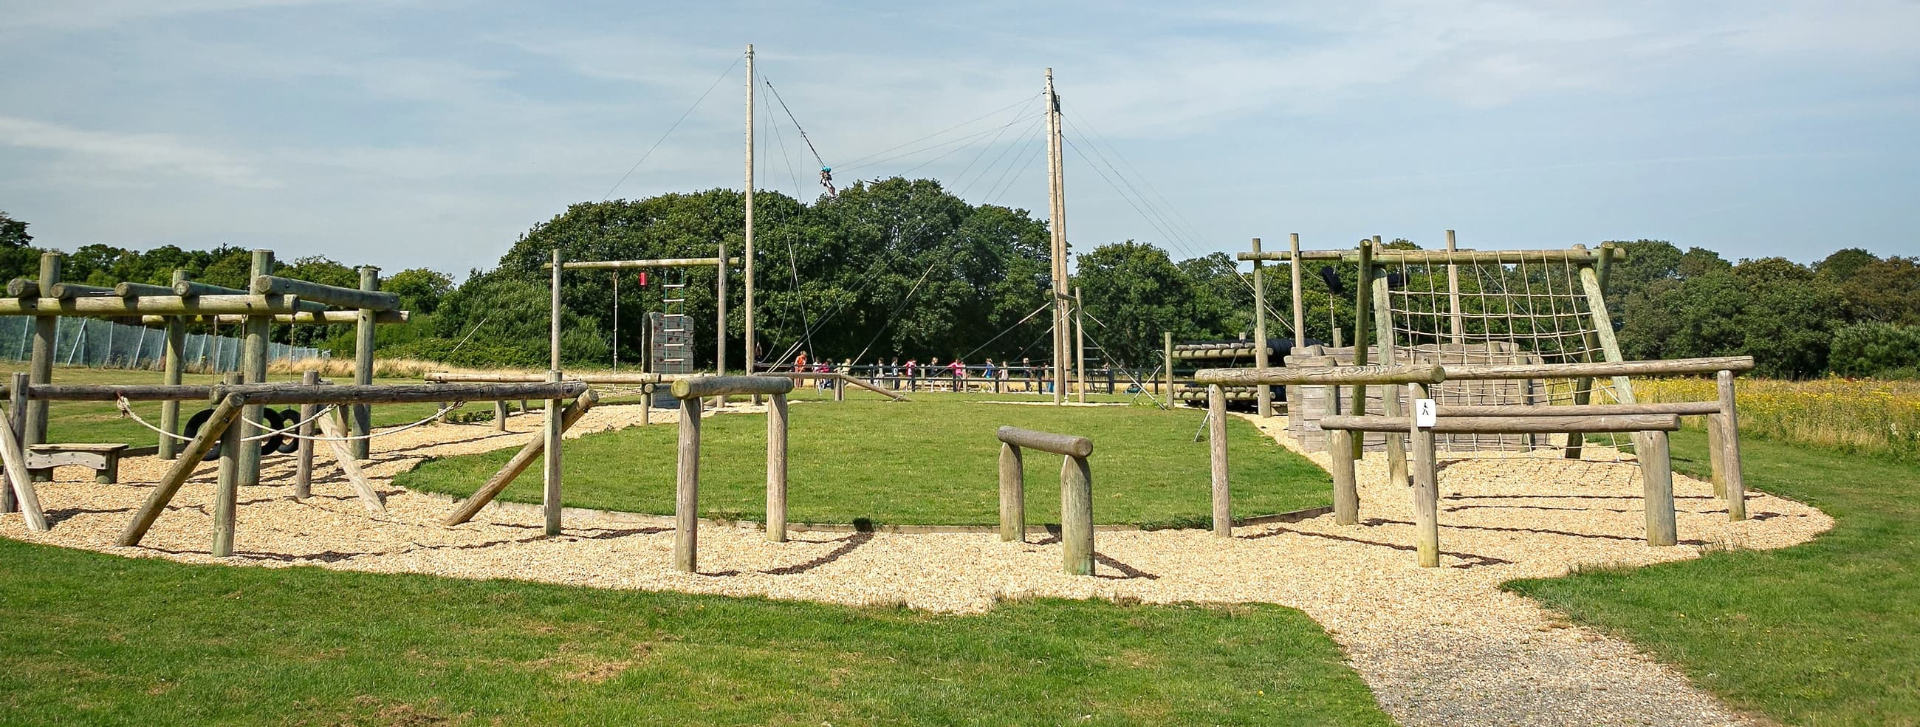 Play park at Kingswood Activity Centre